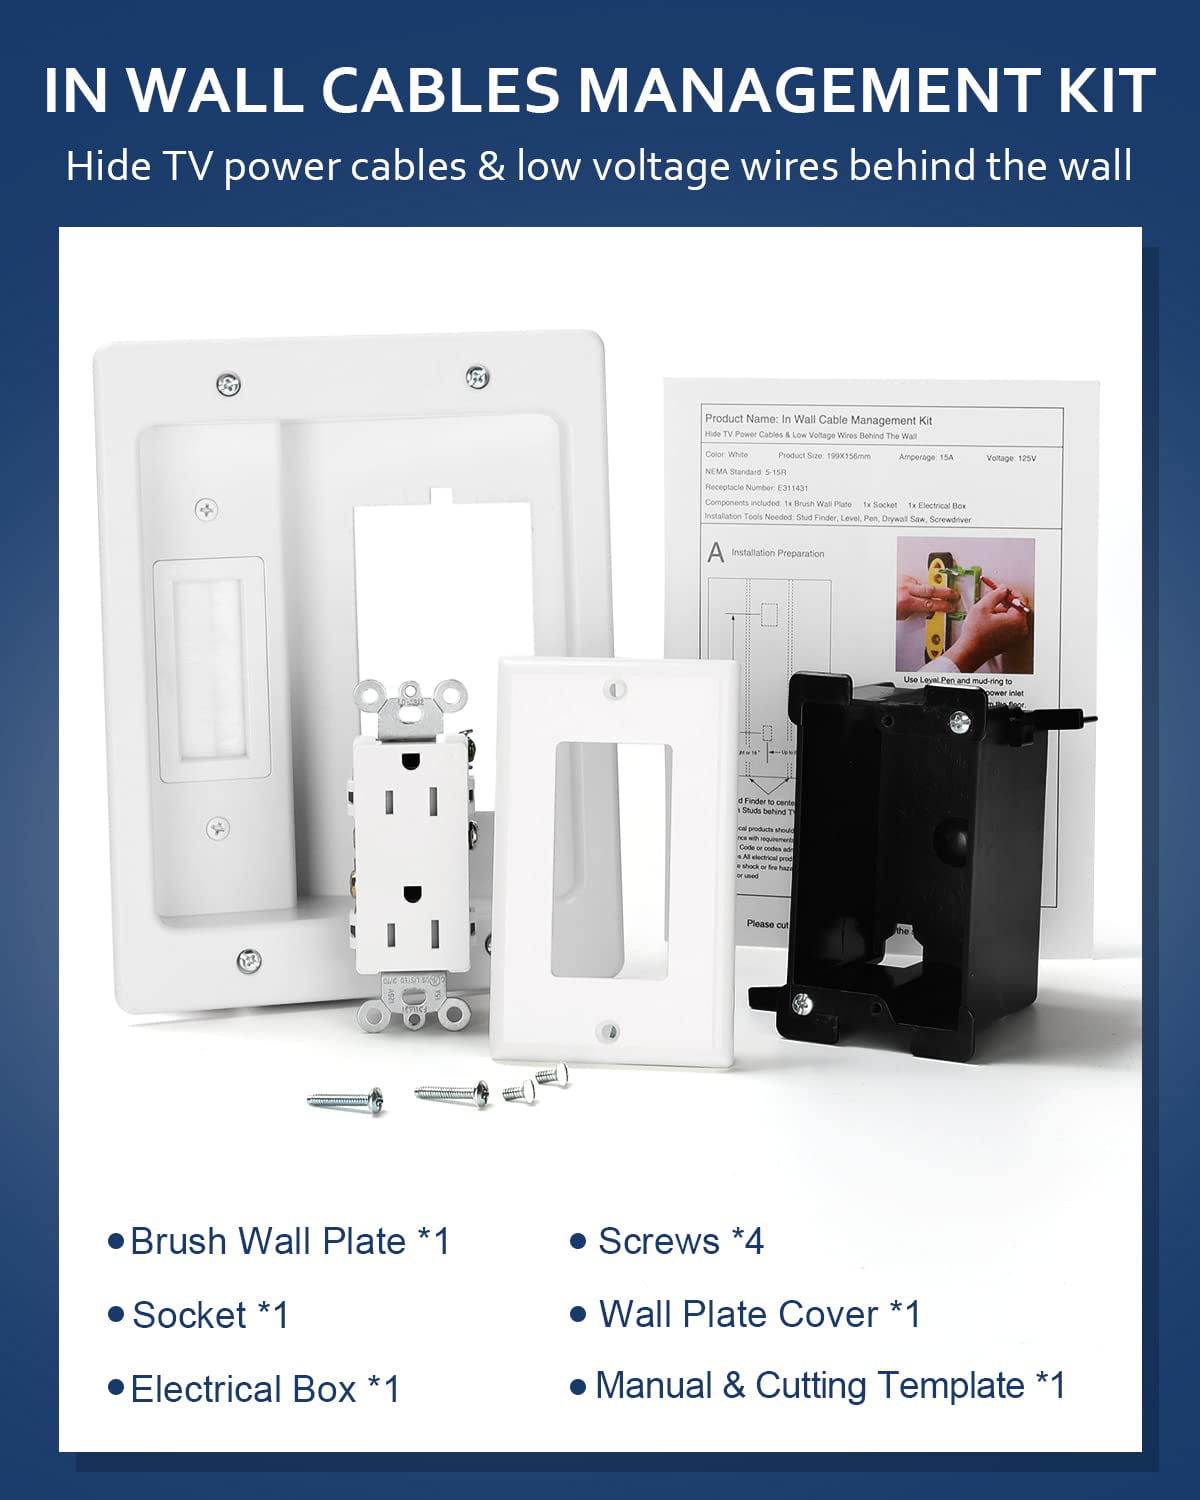 In-Wall Cable Management Kit-Hide TV Power Cables & Low Voltatge